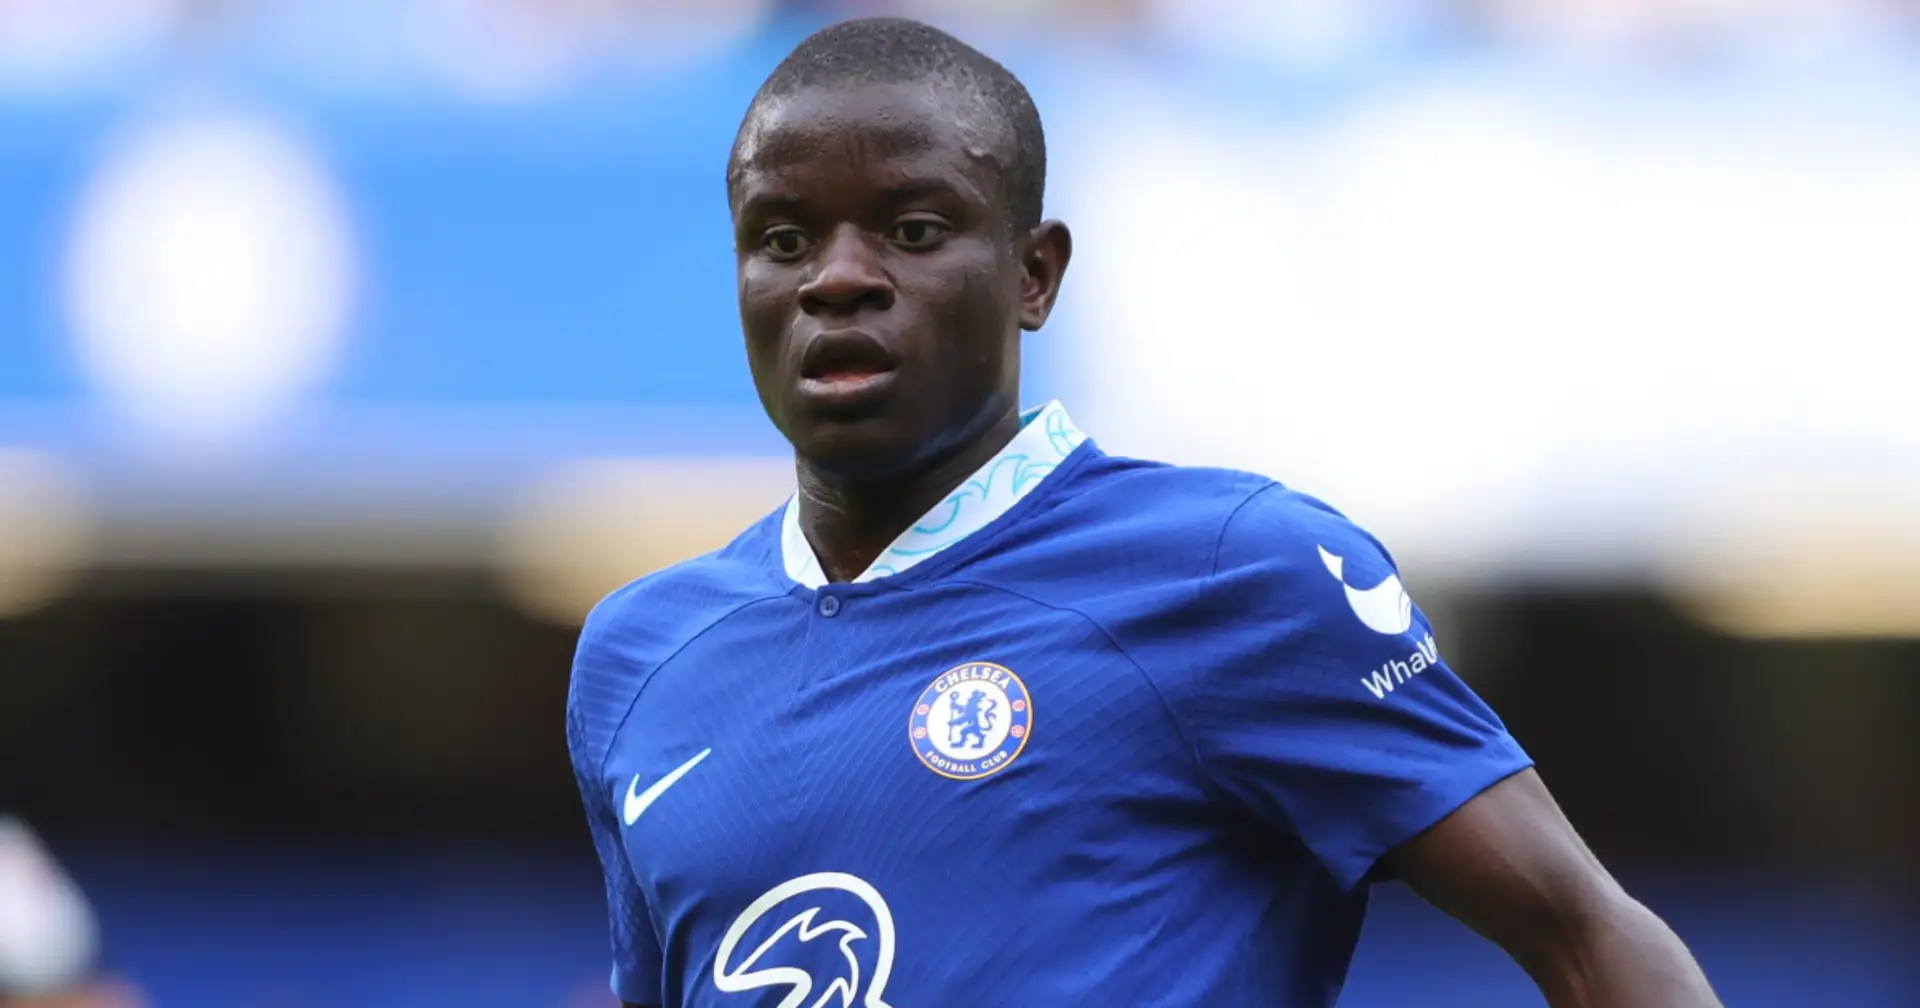 Kante receives approach from Saudi Arabia & 3 more under-radar stories at Chelsea today